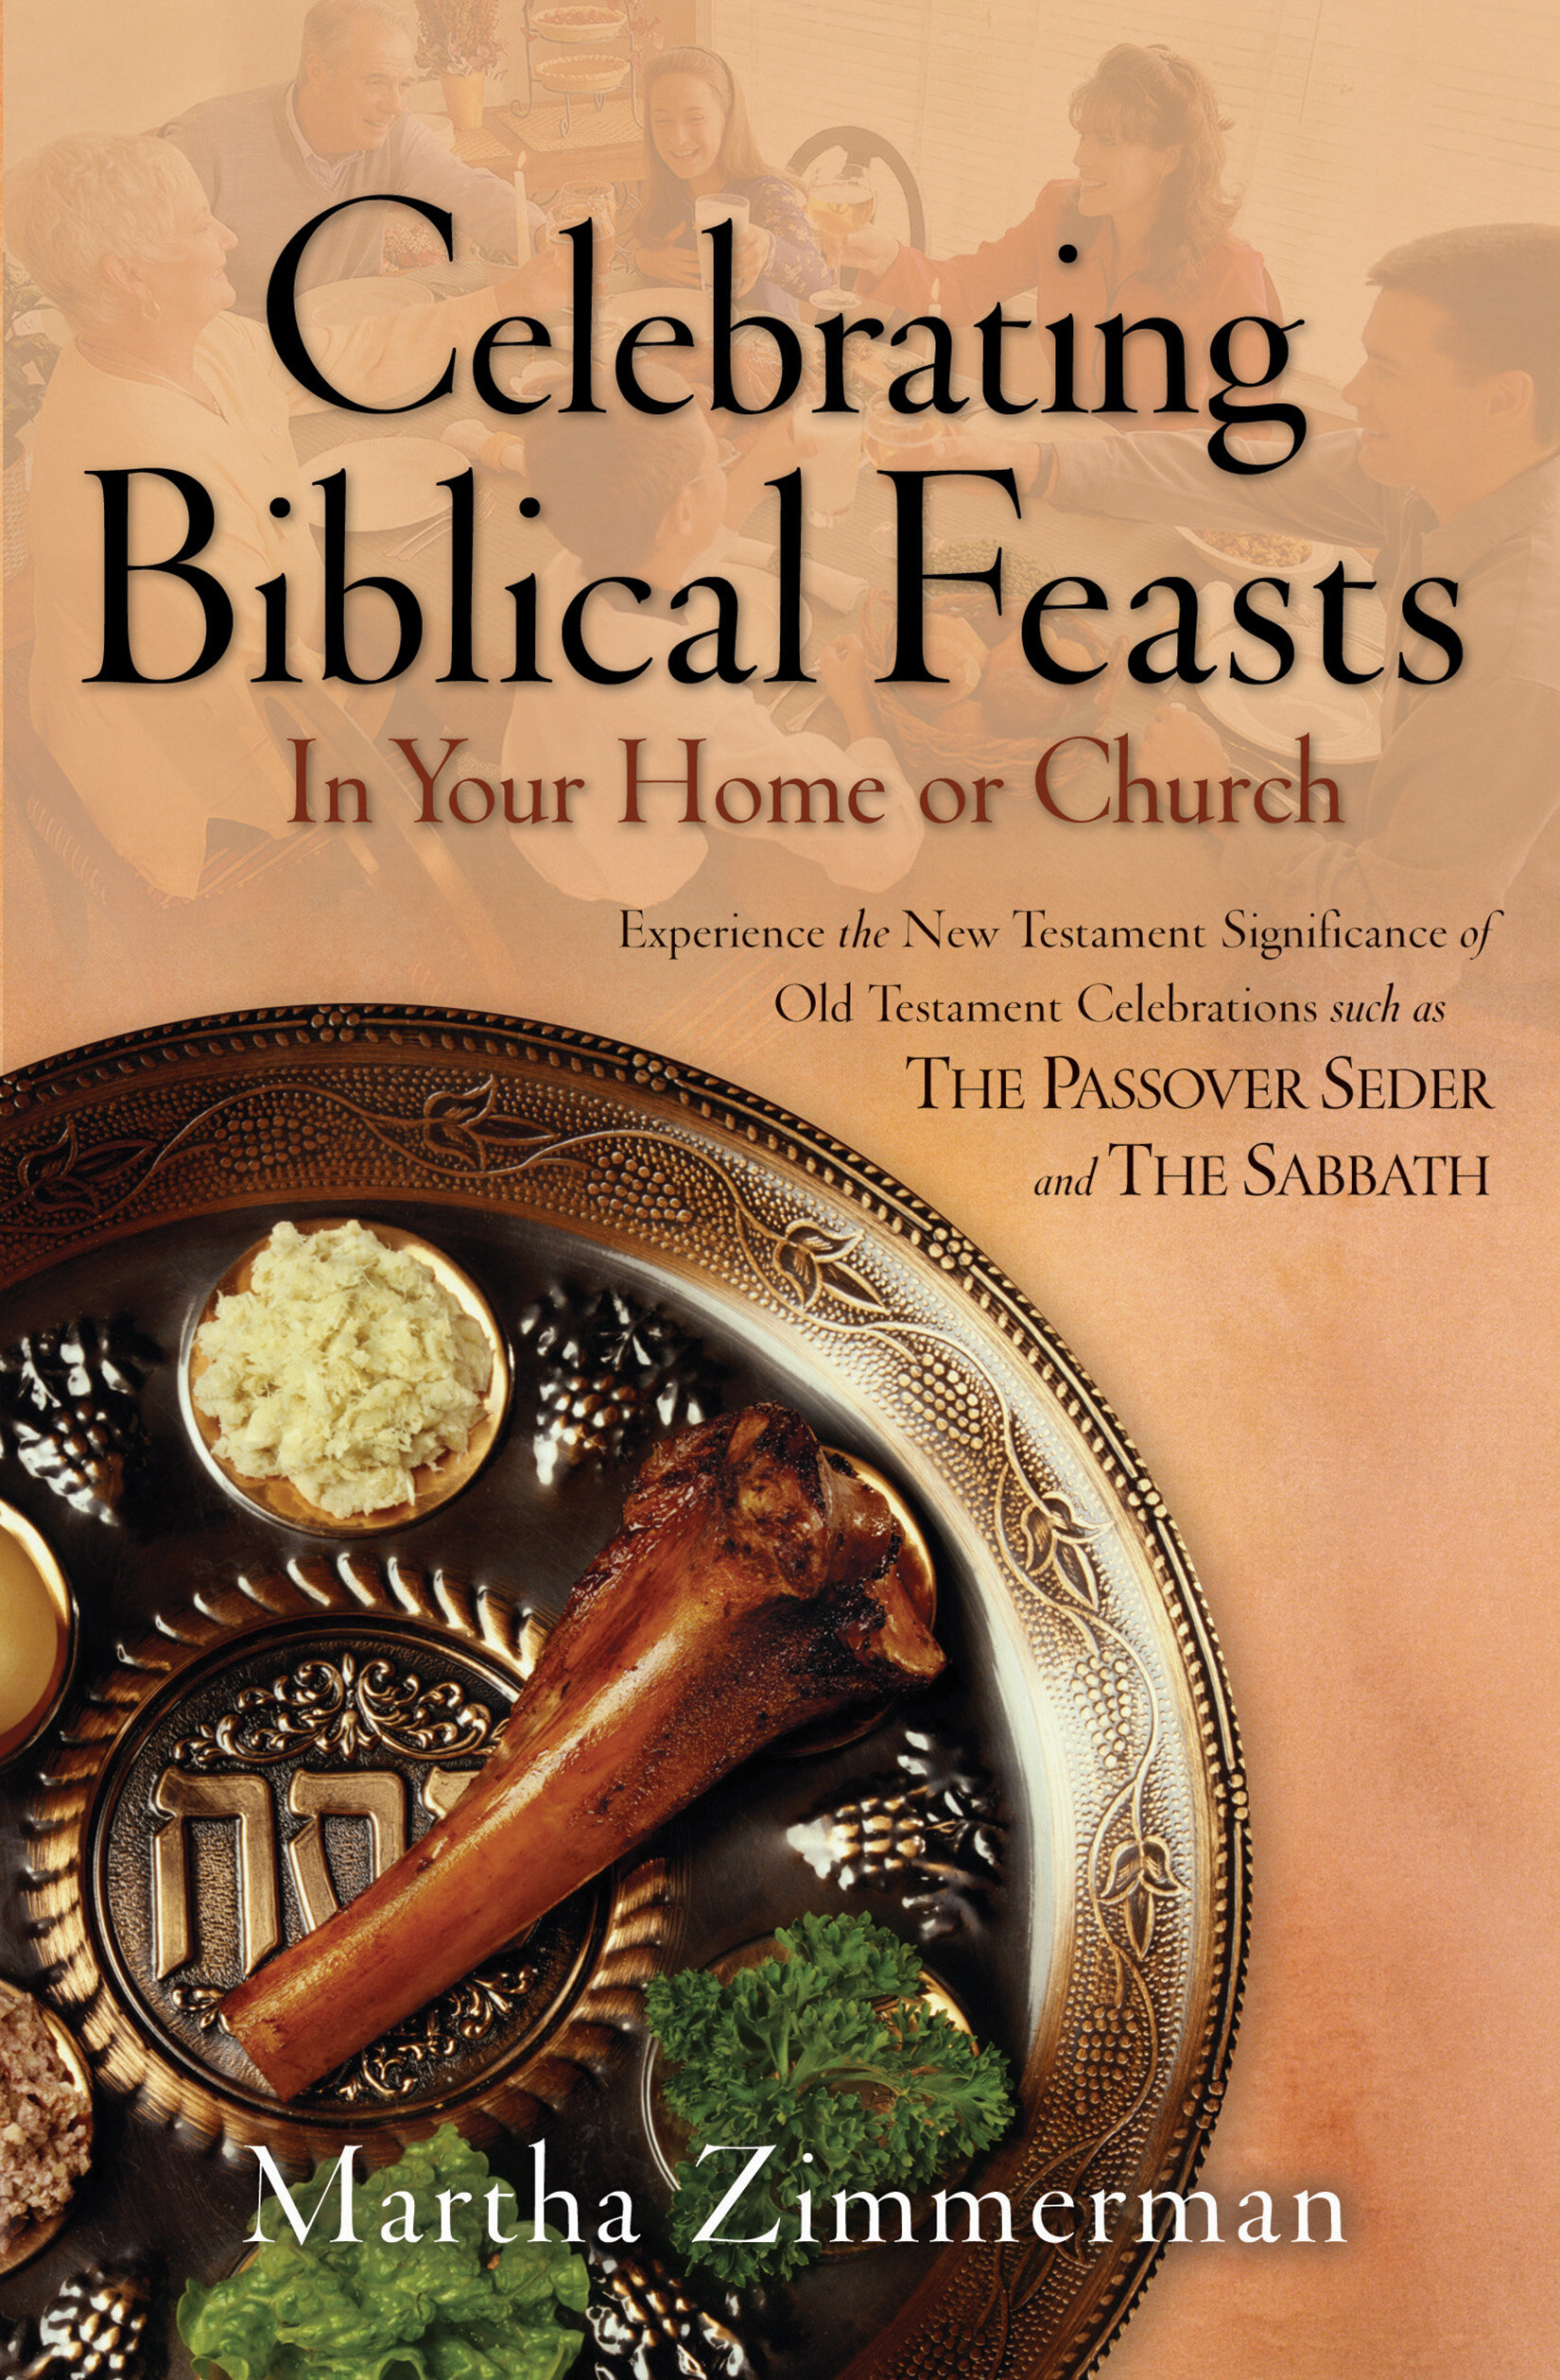 feasts of the bible